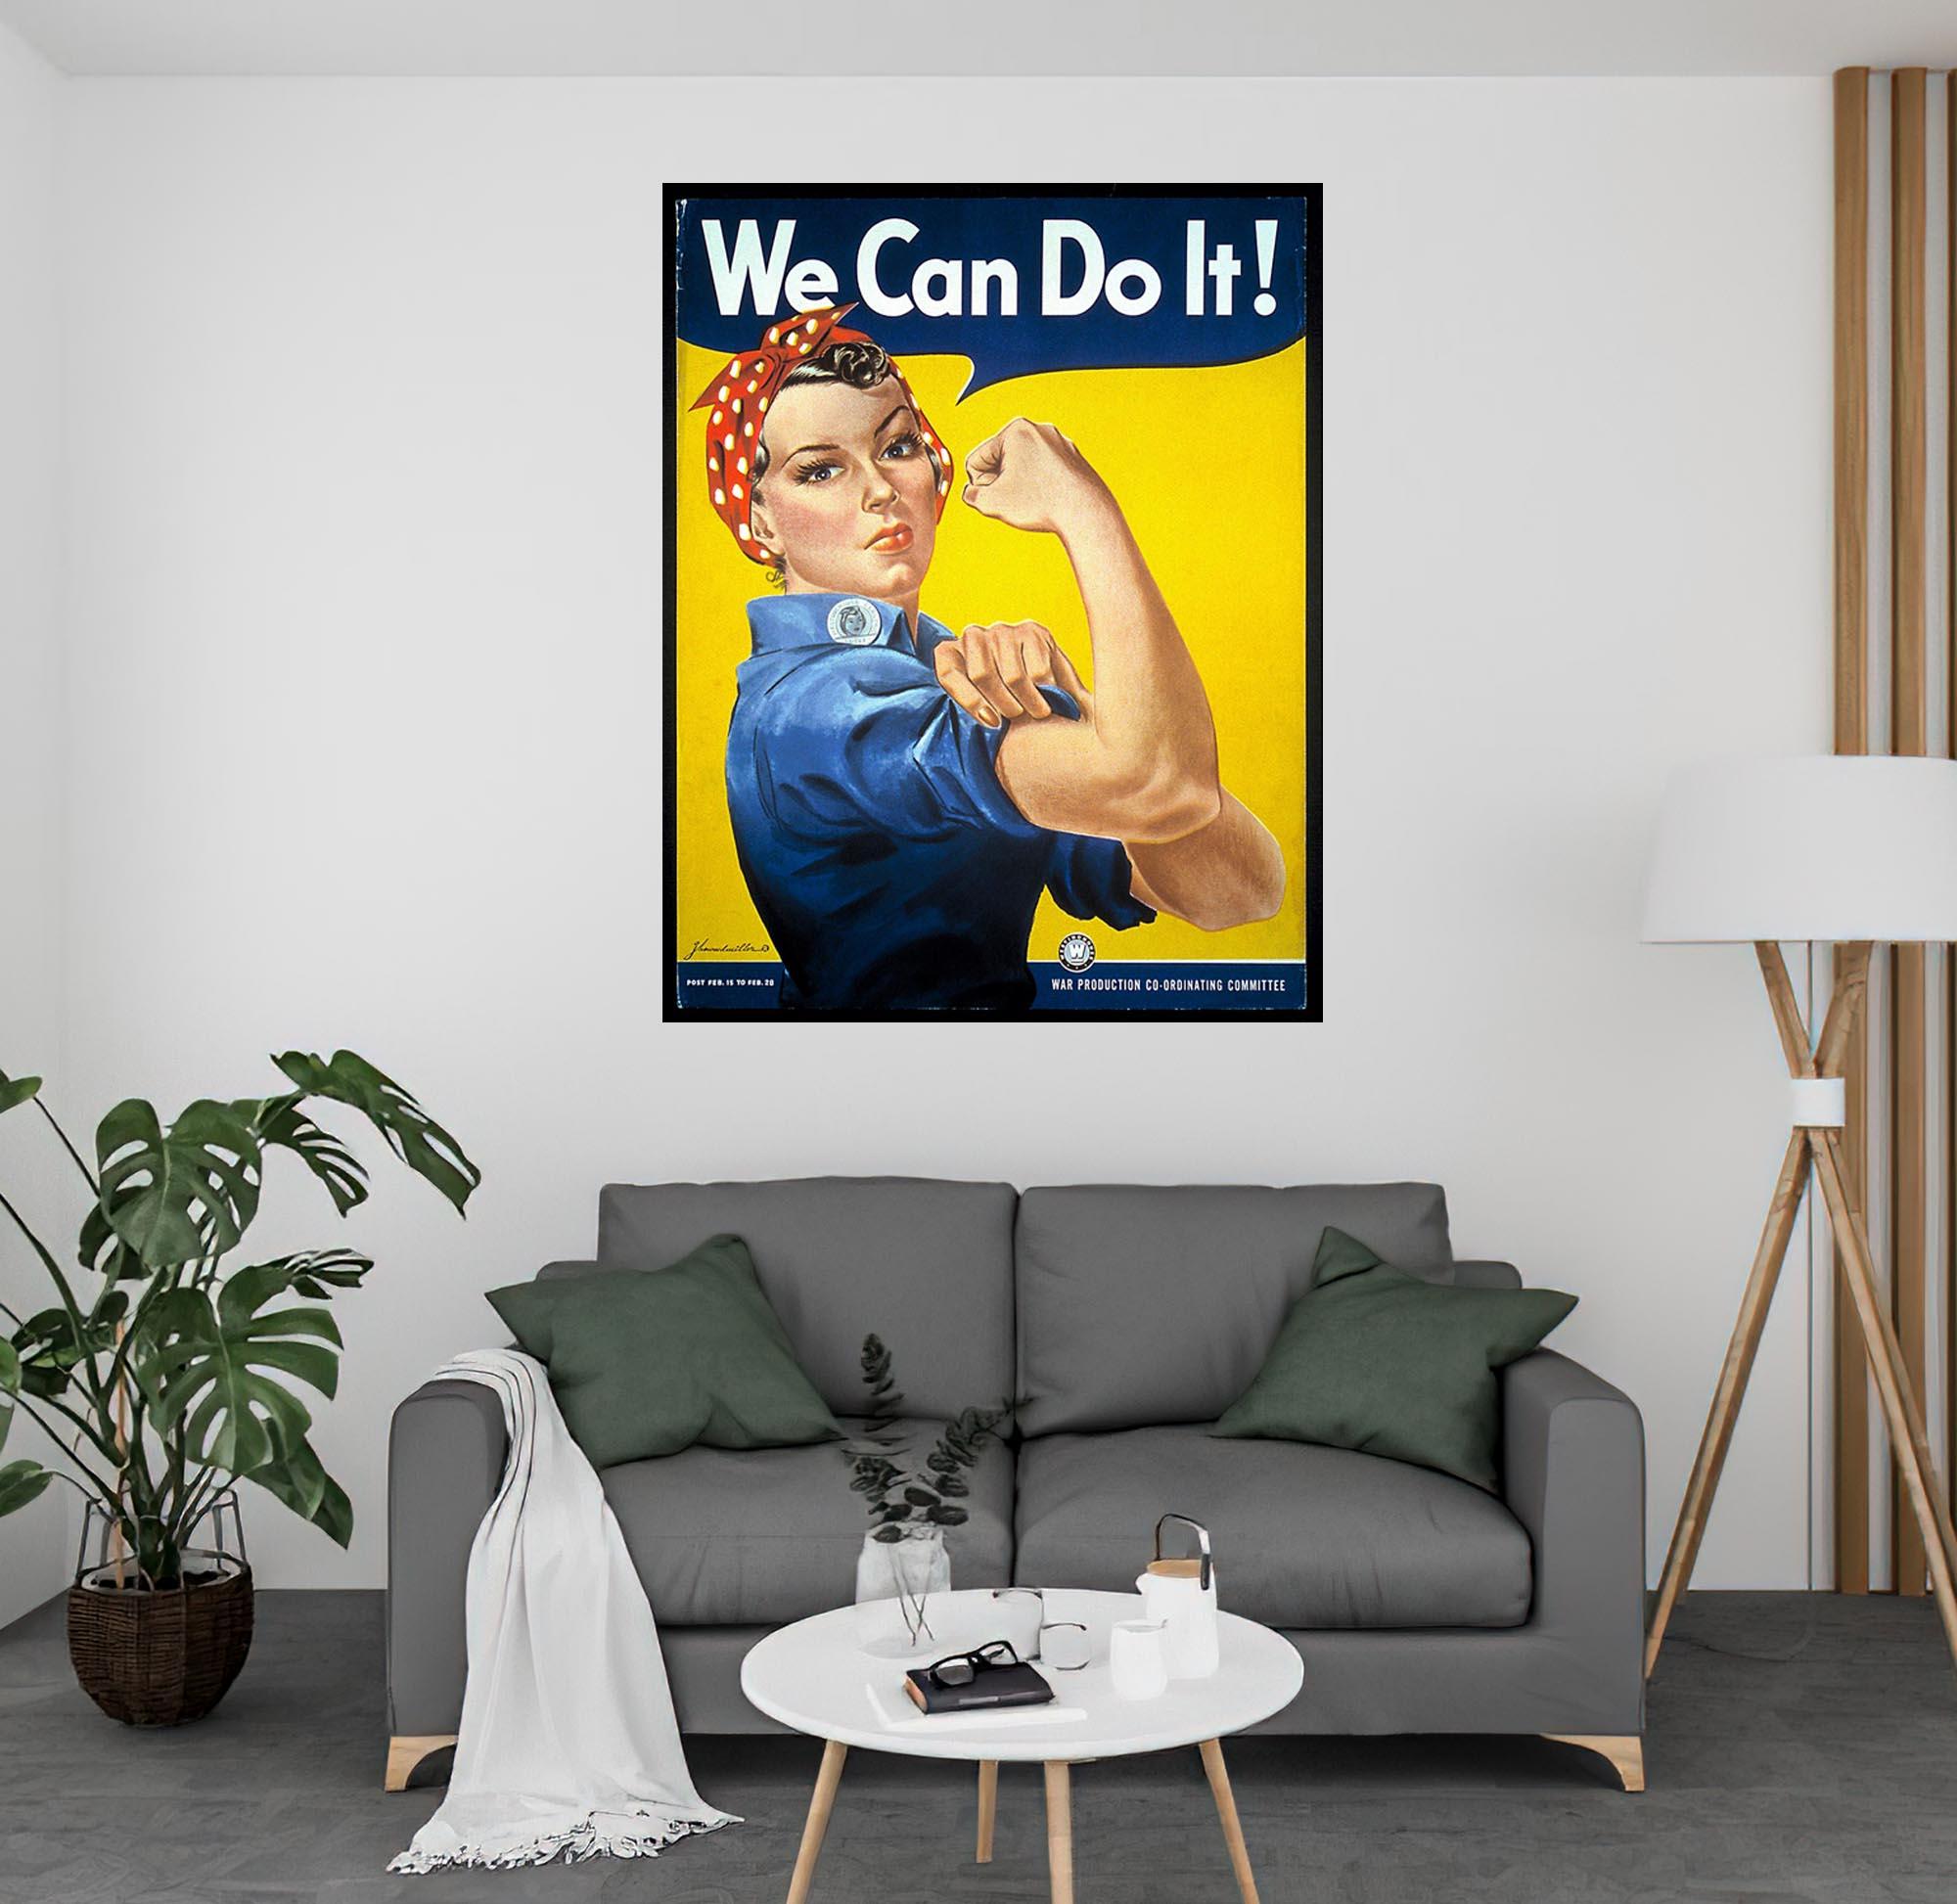 CoolWalls.ca Posters, Prints, & Visual Artwork War Advert Rosie Riveter WW2 We Can Do It Women USA Artwork: Peel_n_Stick onto the wall, wallpaper like fabric